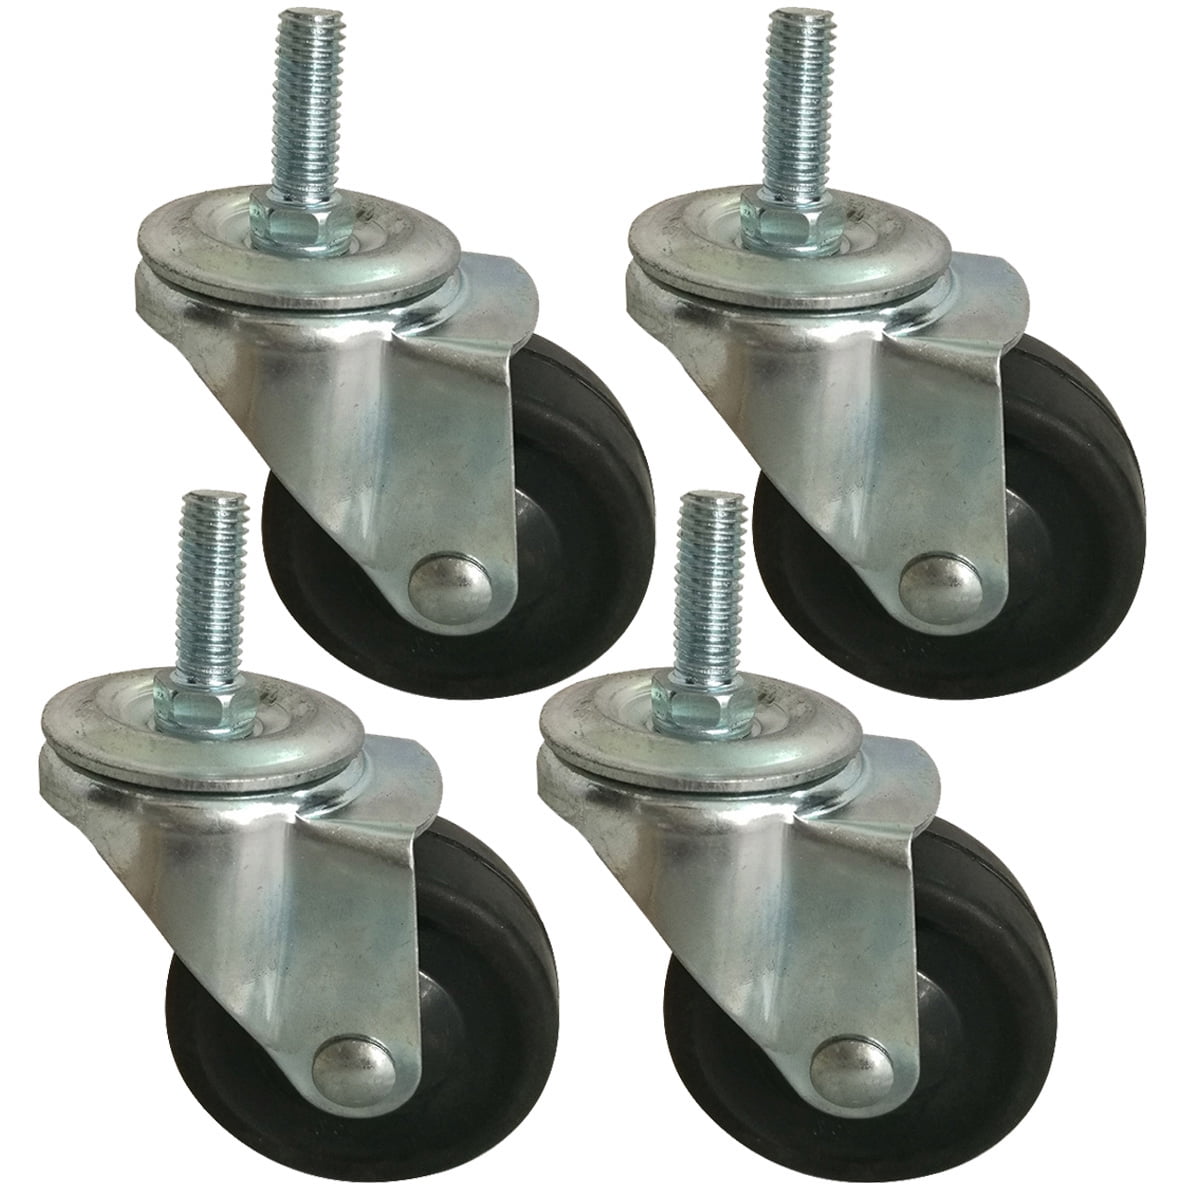 2 inch,Brak Moving Caster Wheels Trolley Wheels Office Chair Caster,Furniture Caster,Swivel Stem Castors,Caster with Brakes,M8 Stem Caster Wheel,Load Capacity 100kg,Protect Your Carpet,Hardwood,5 pcs 